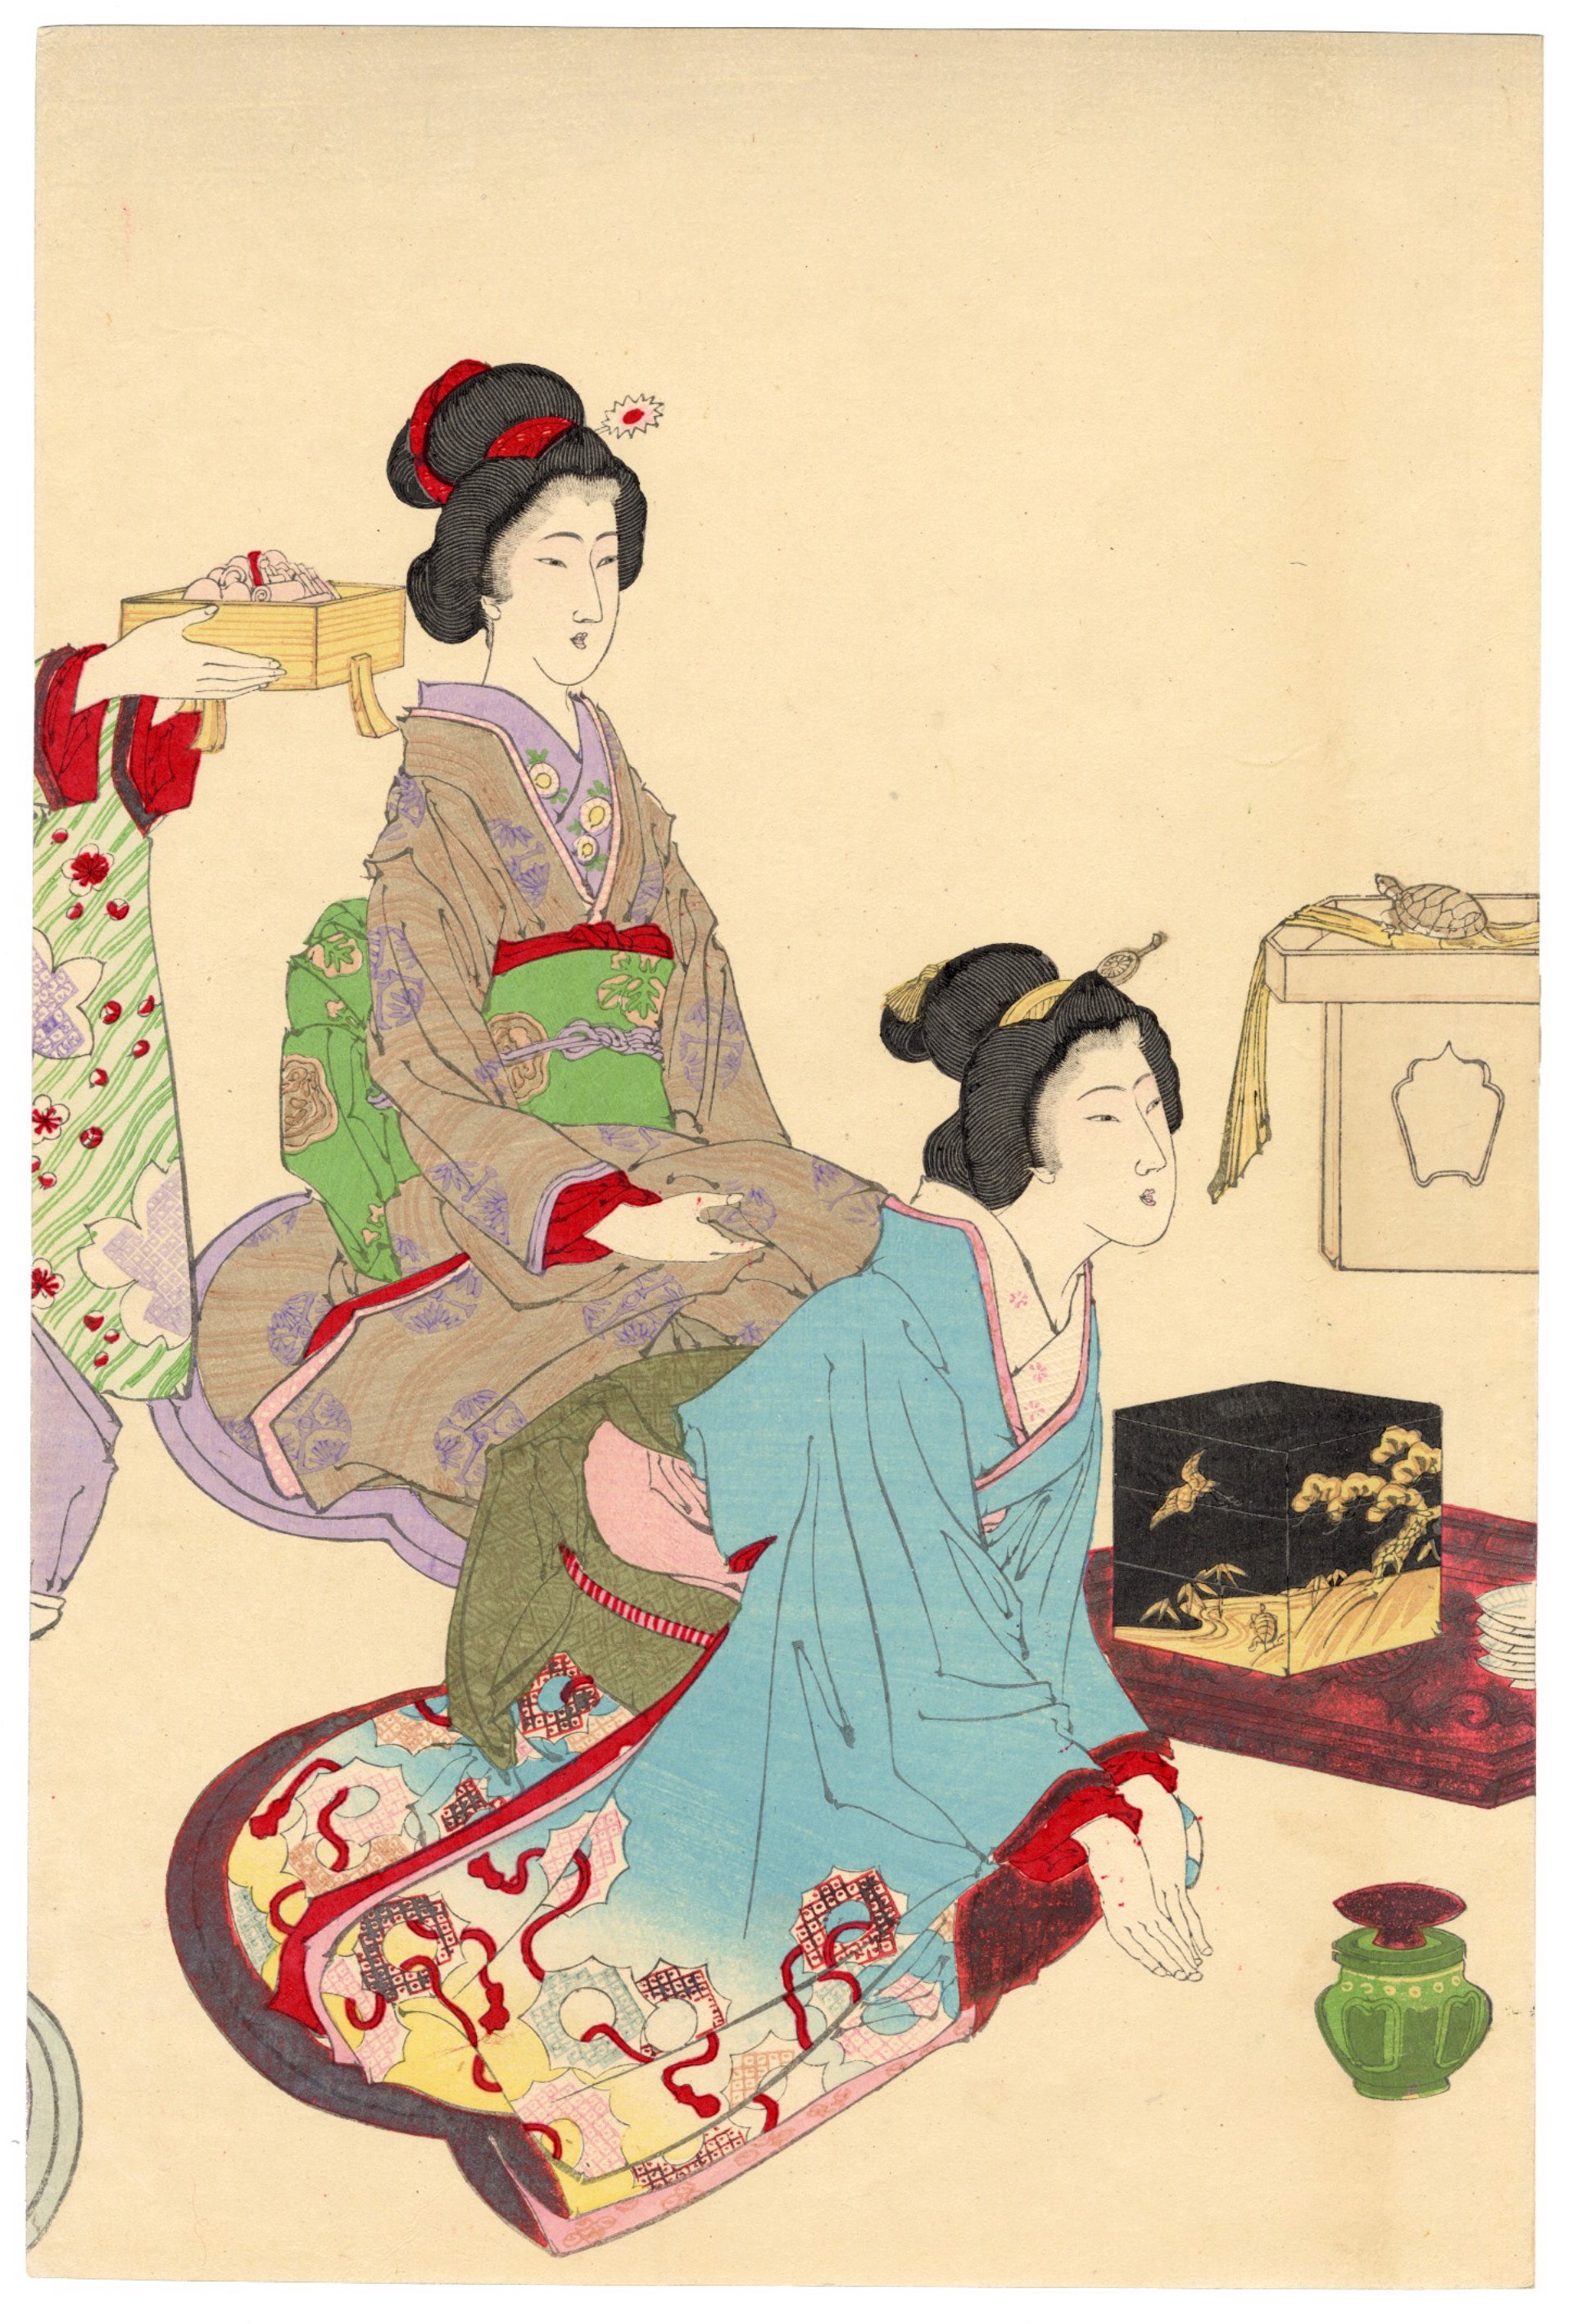 January - New Years Customs and Manners of Yamato (Japan) by Shuko Tomita